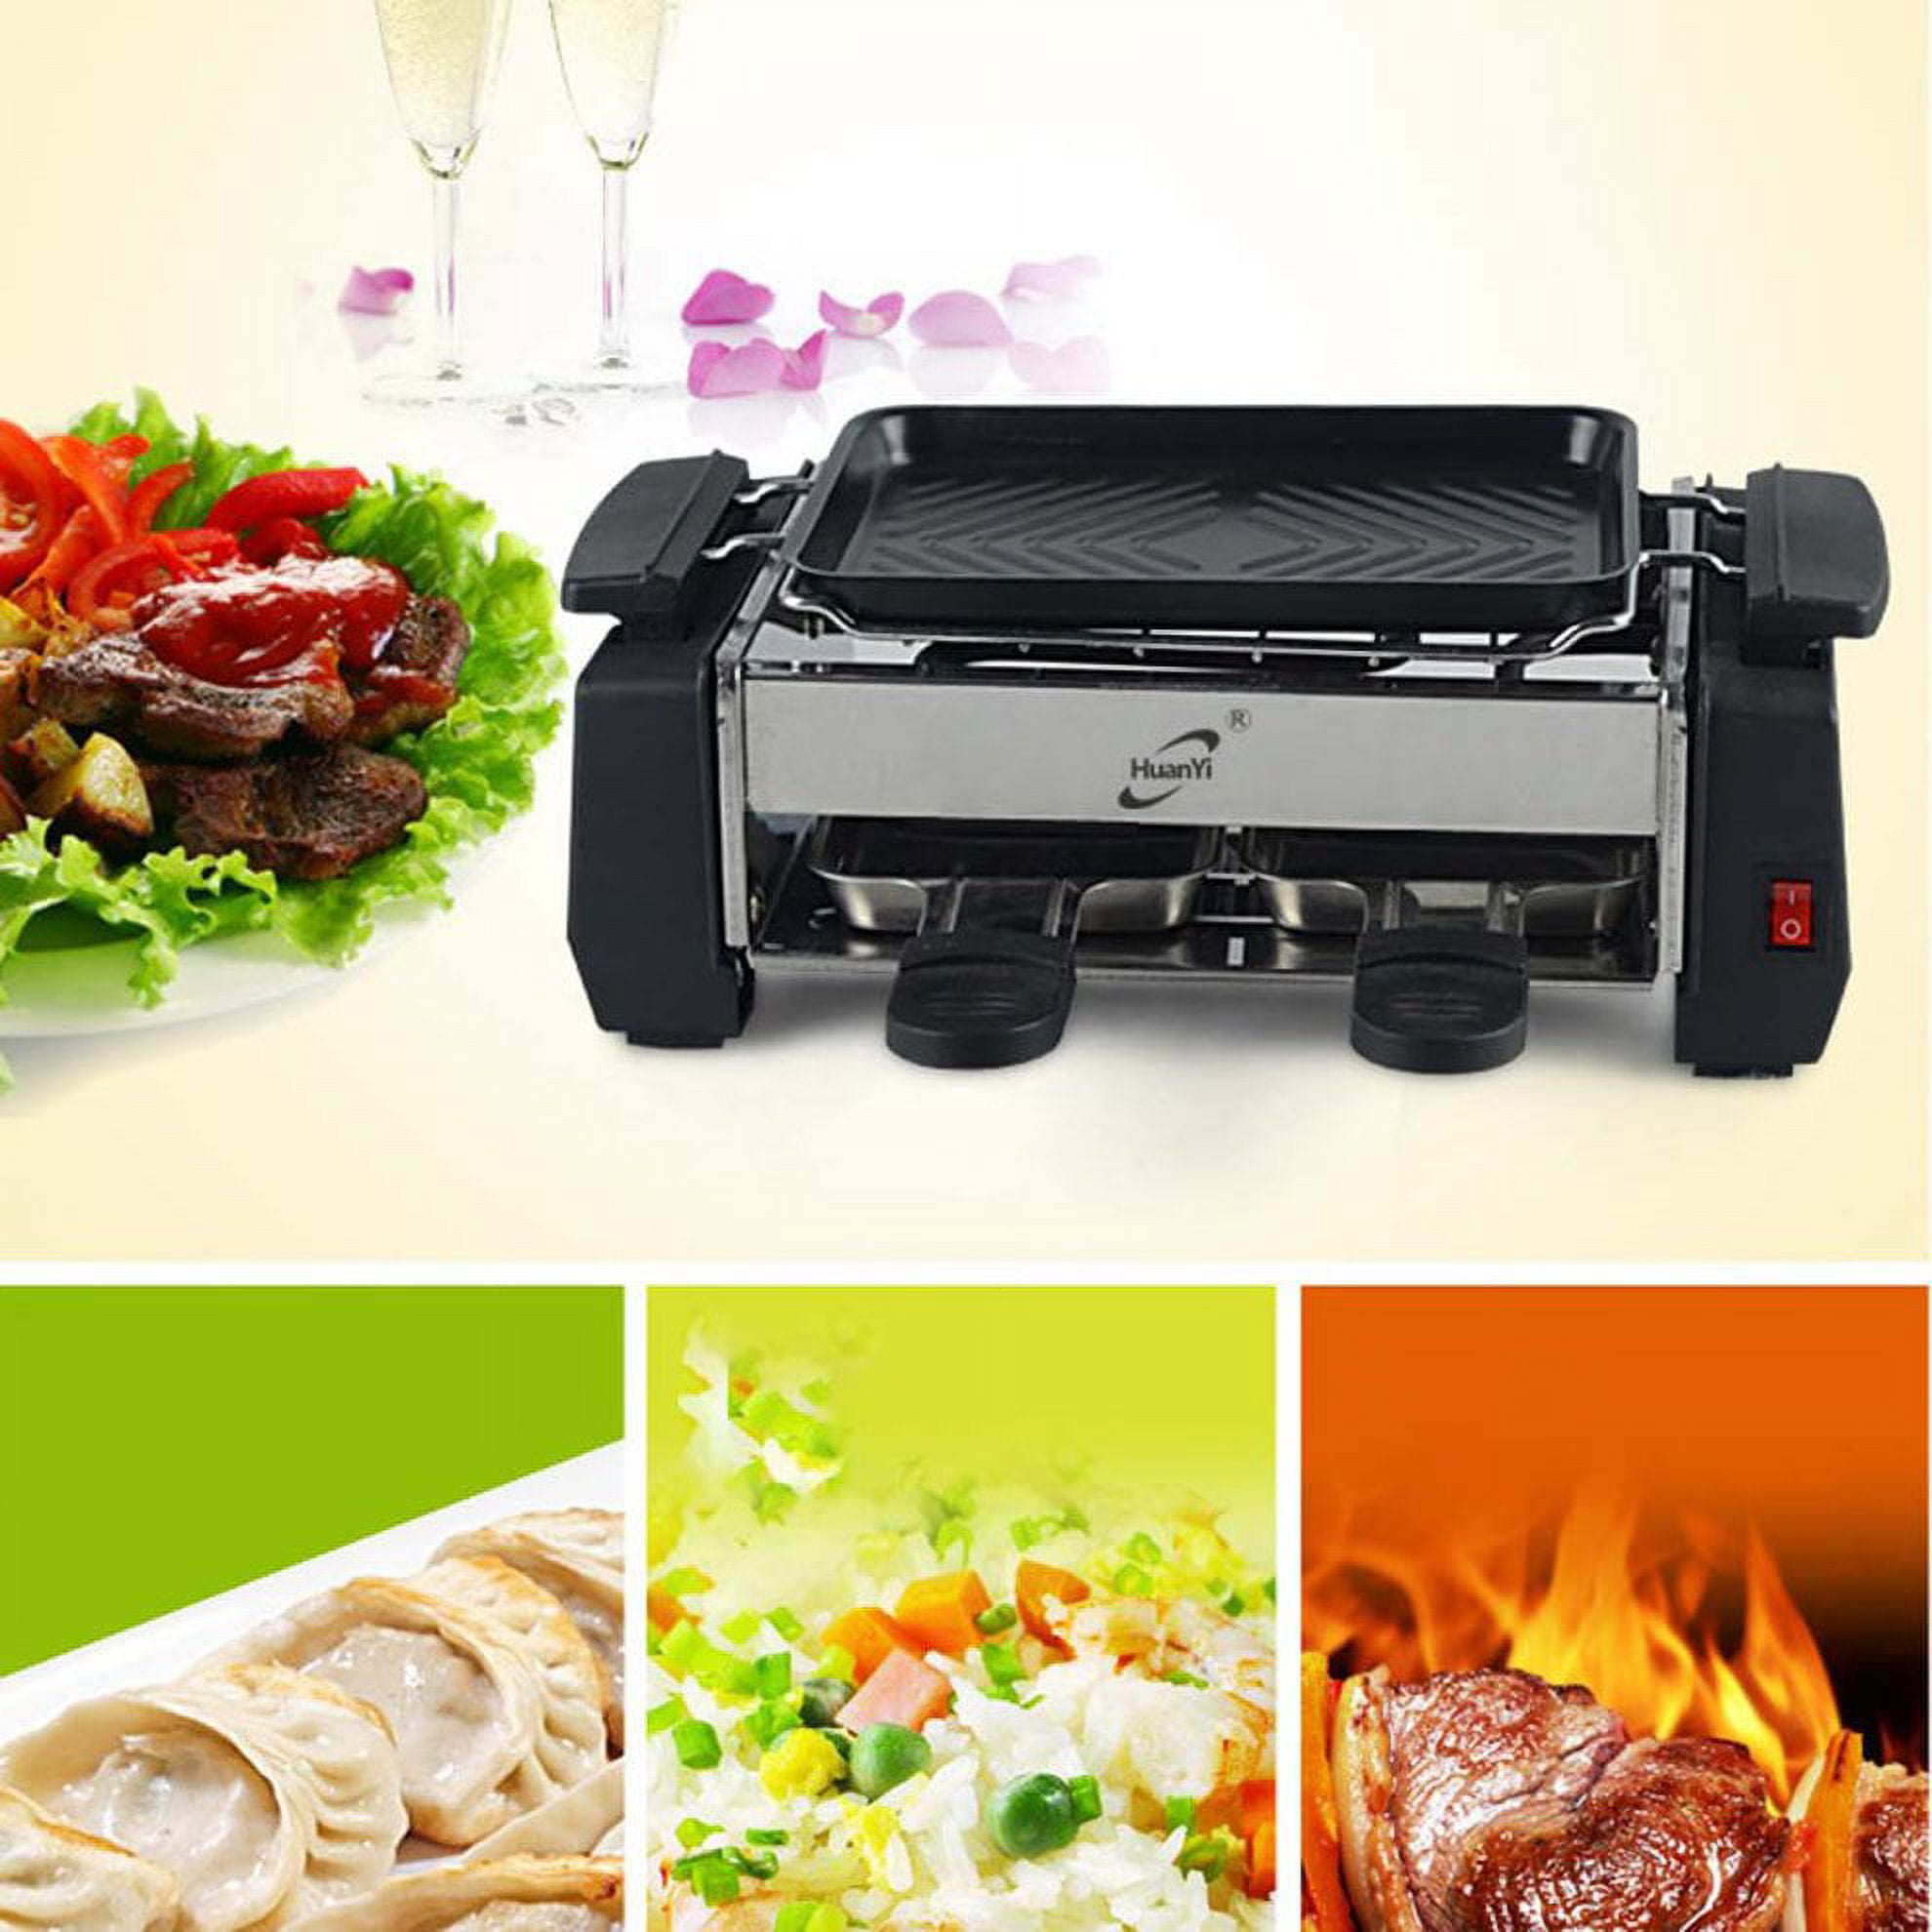 DMWD Household Electric Raclette Grill Machine Smokeless Griddle Non-Stick  BBQ Pan Bakeware Oven Outdoor Barbecue